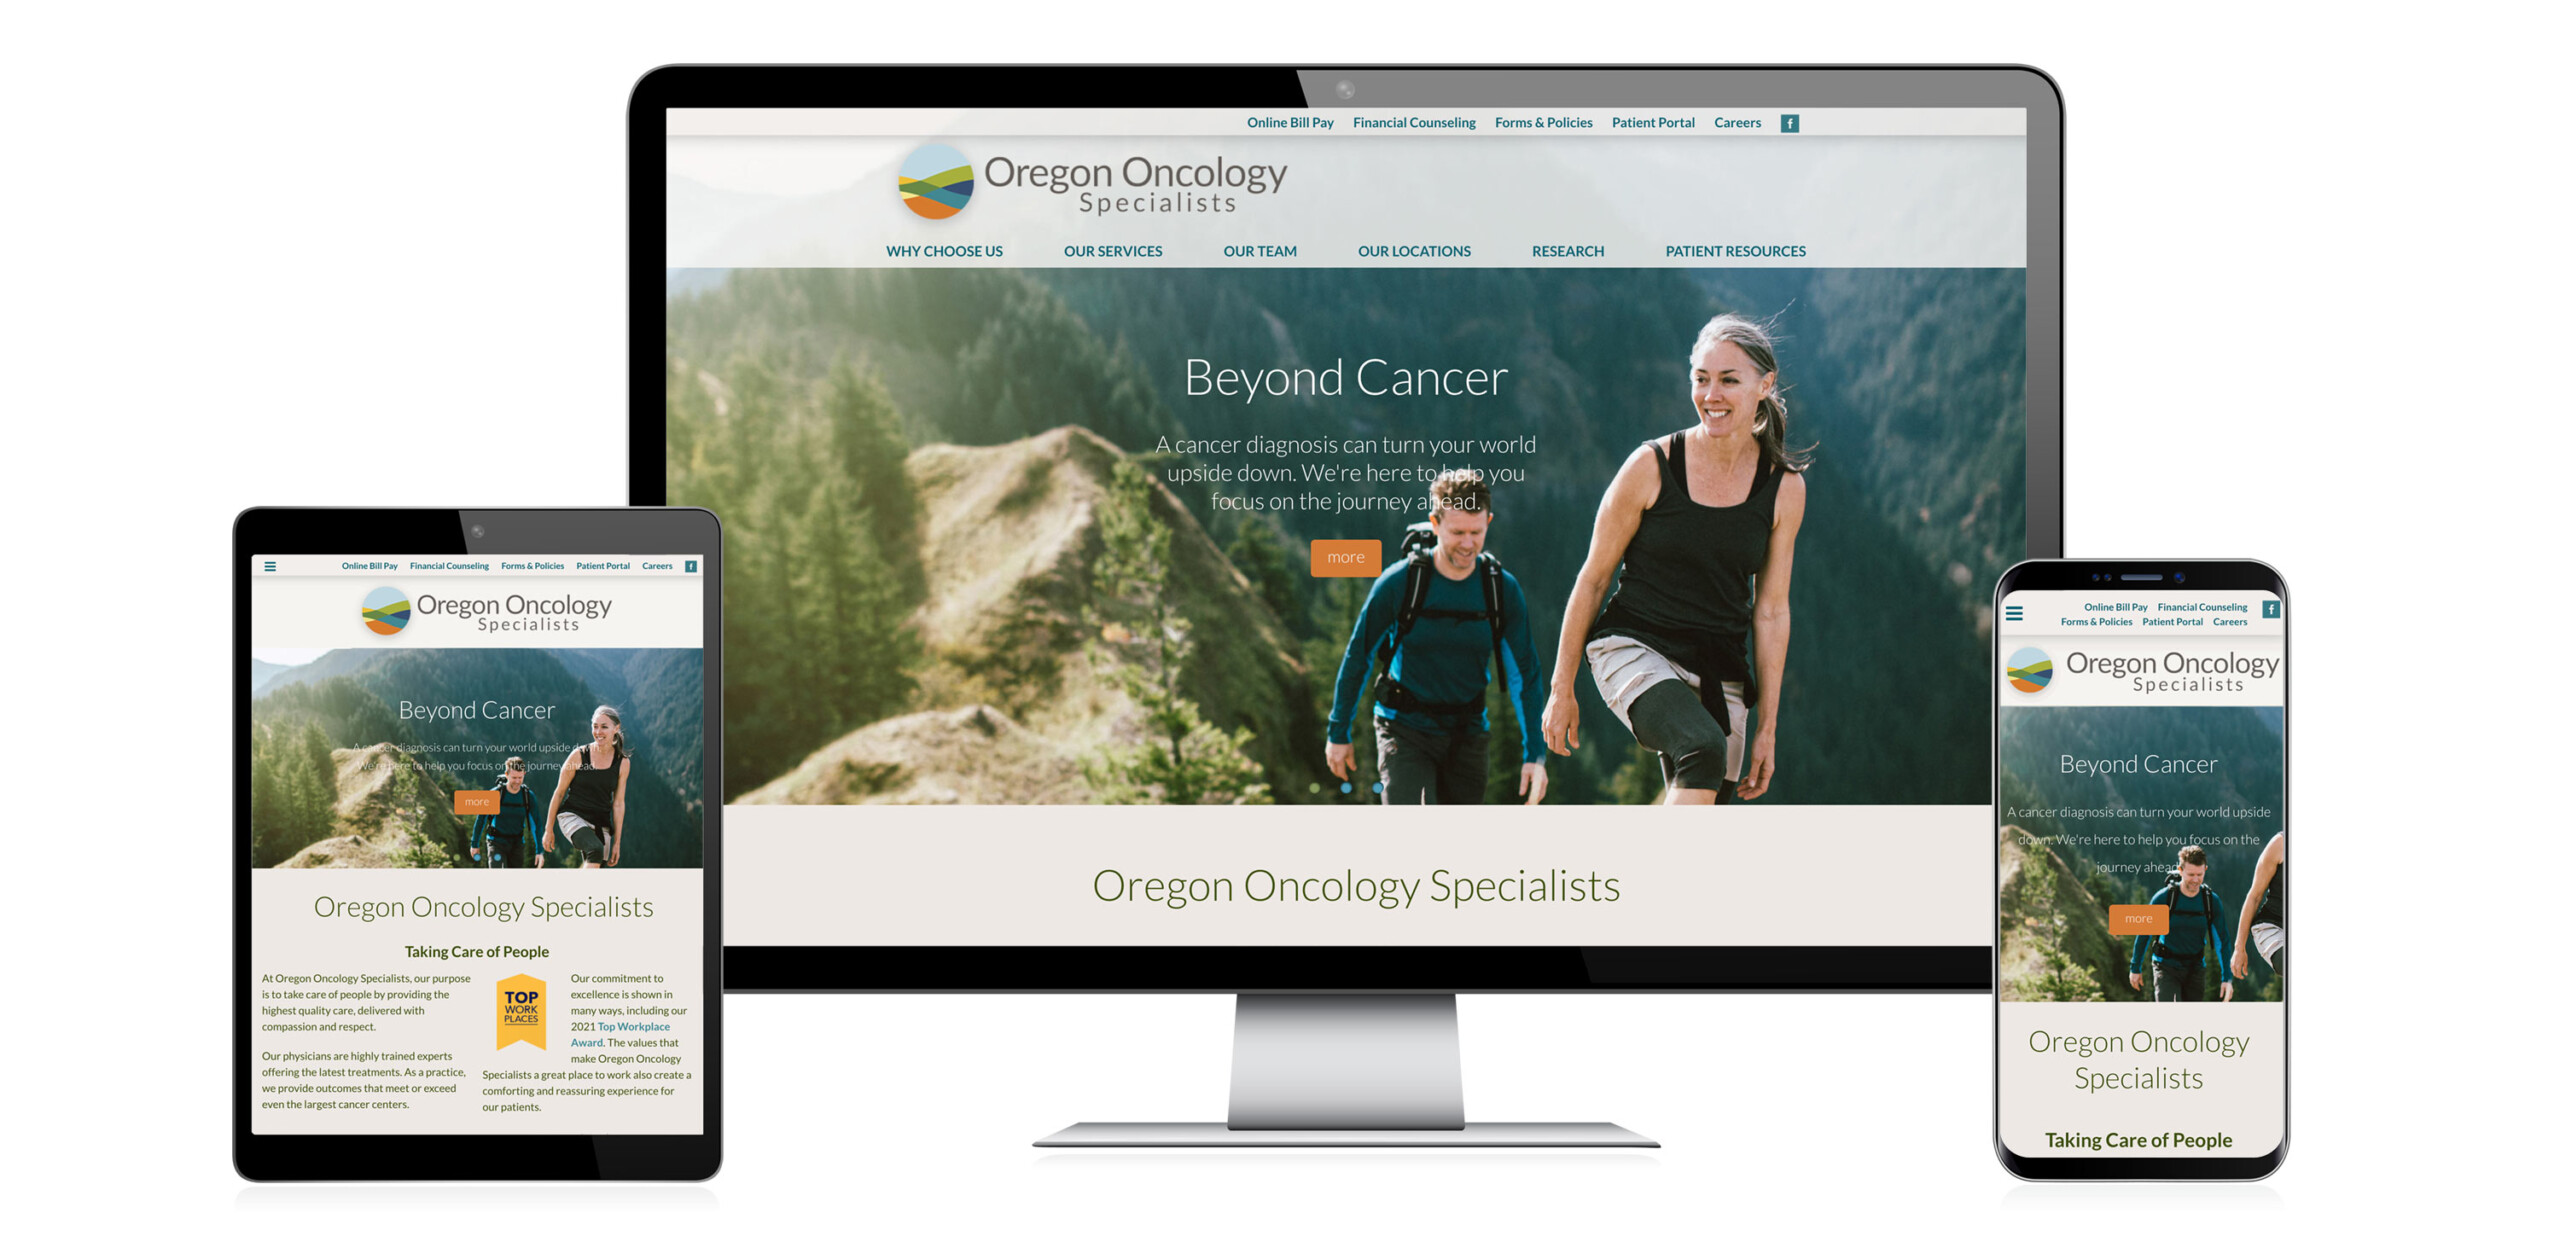 Oregon Oncology Specialists website home page displayed on several devices.